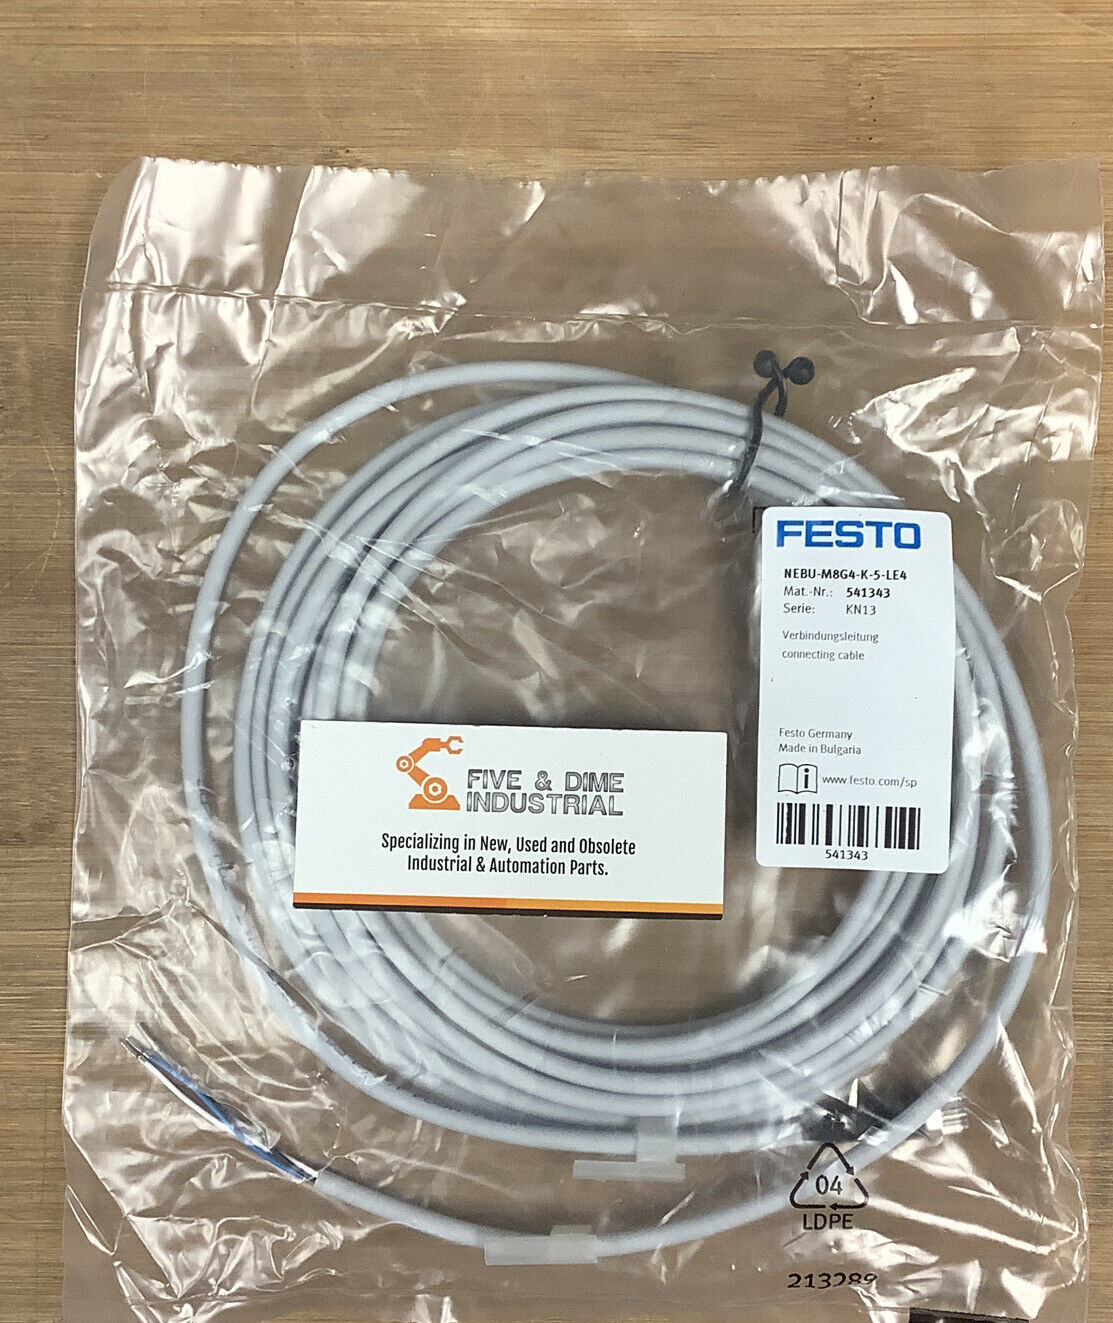 Festo NEBU-M8G4-K-5-LE4 New Connecting Cable (CL307)